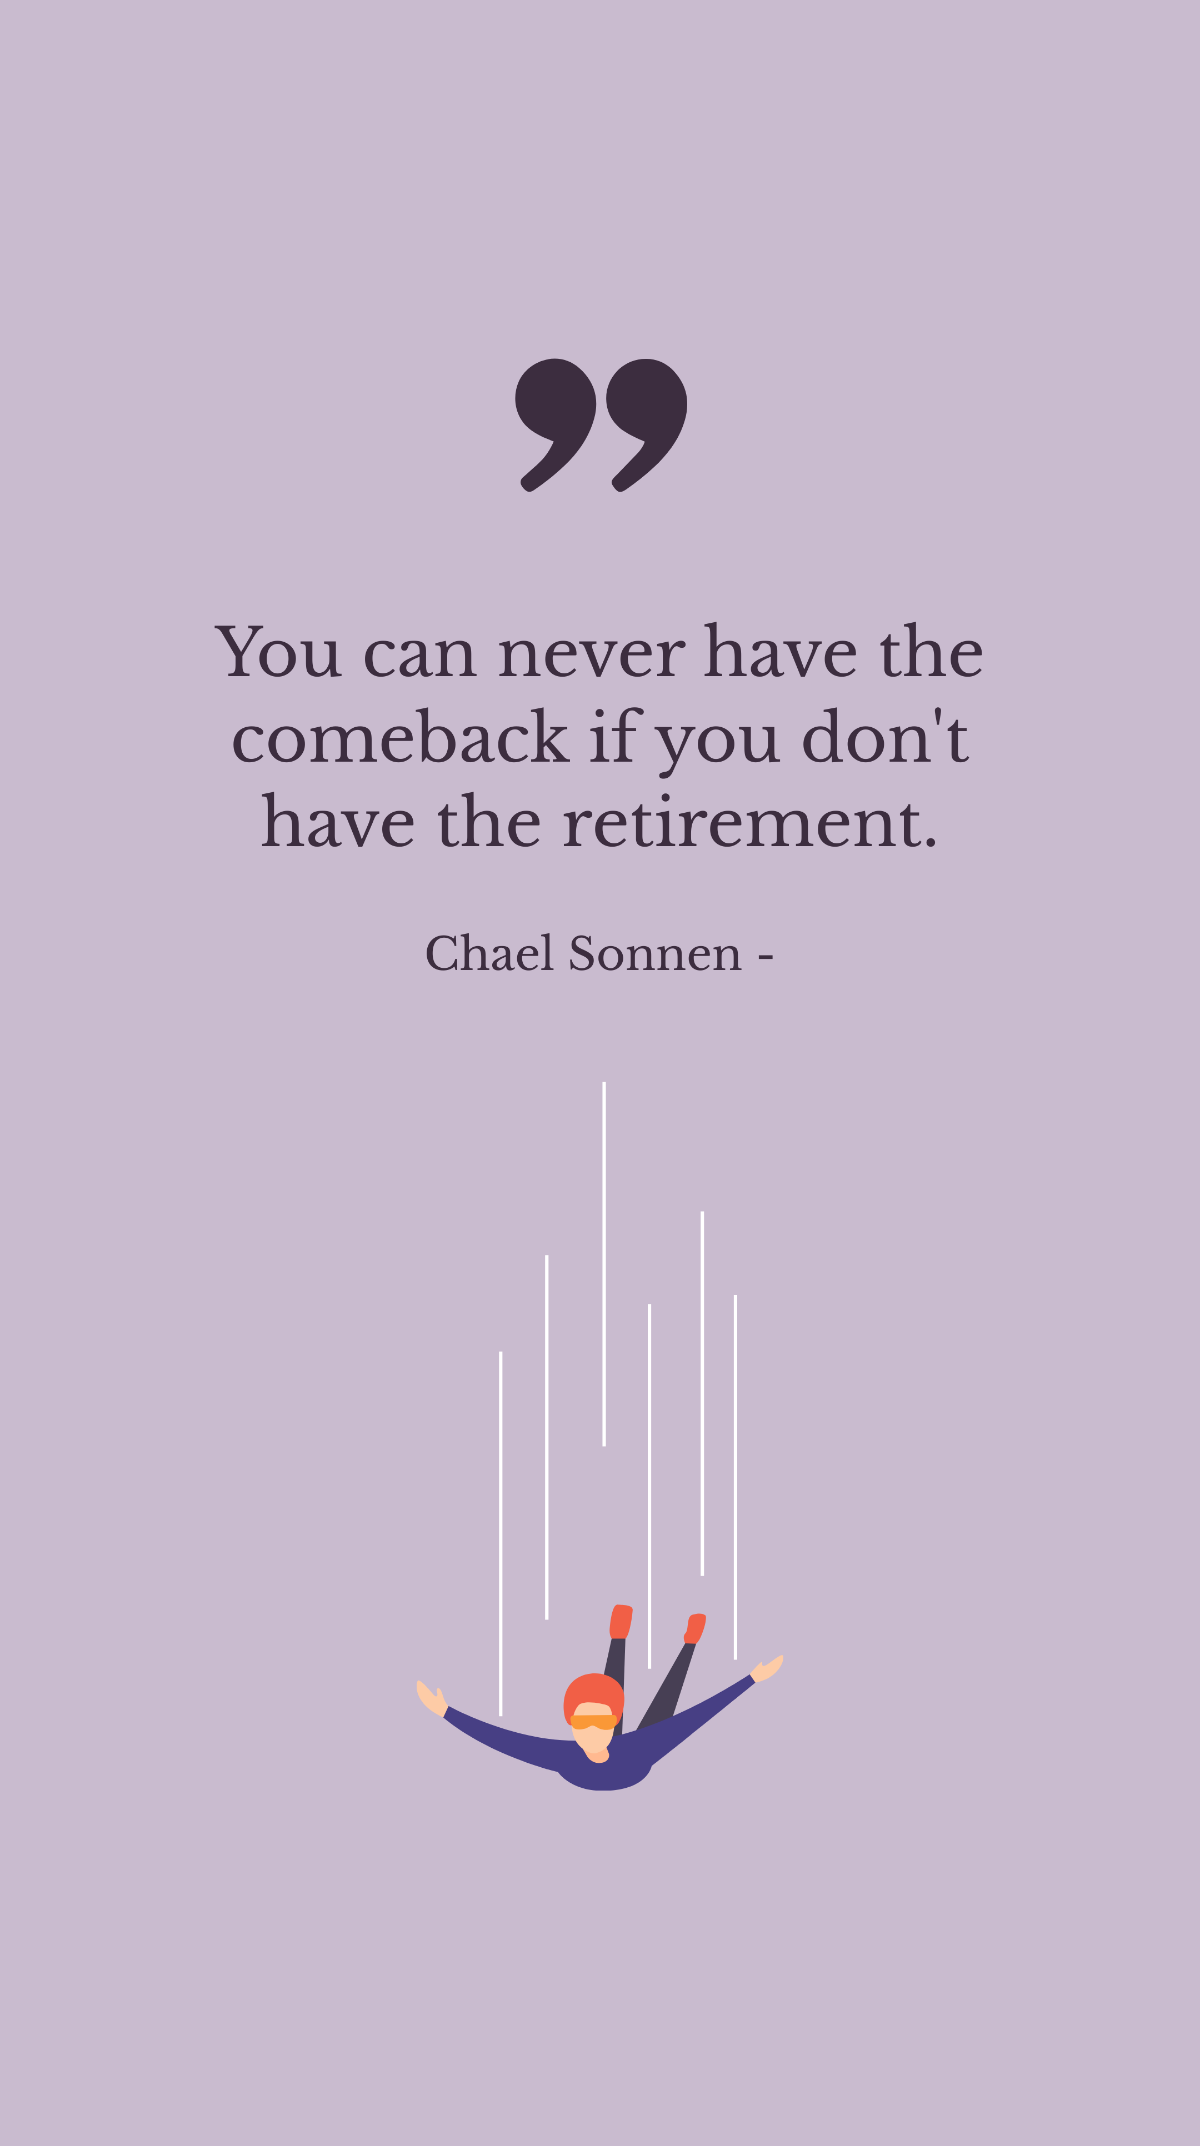 Chael Sonnen - You can never have the comeback if you don't have the retirement. Template